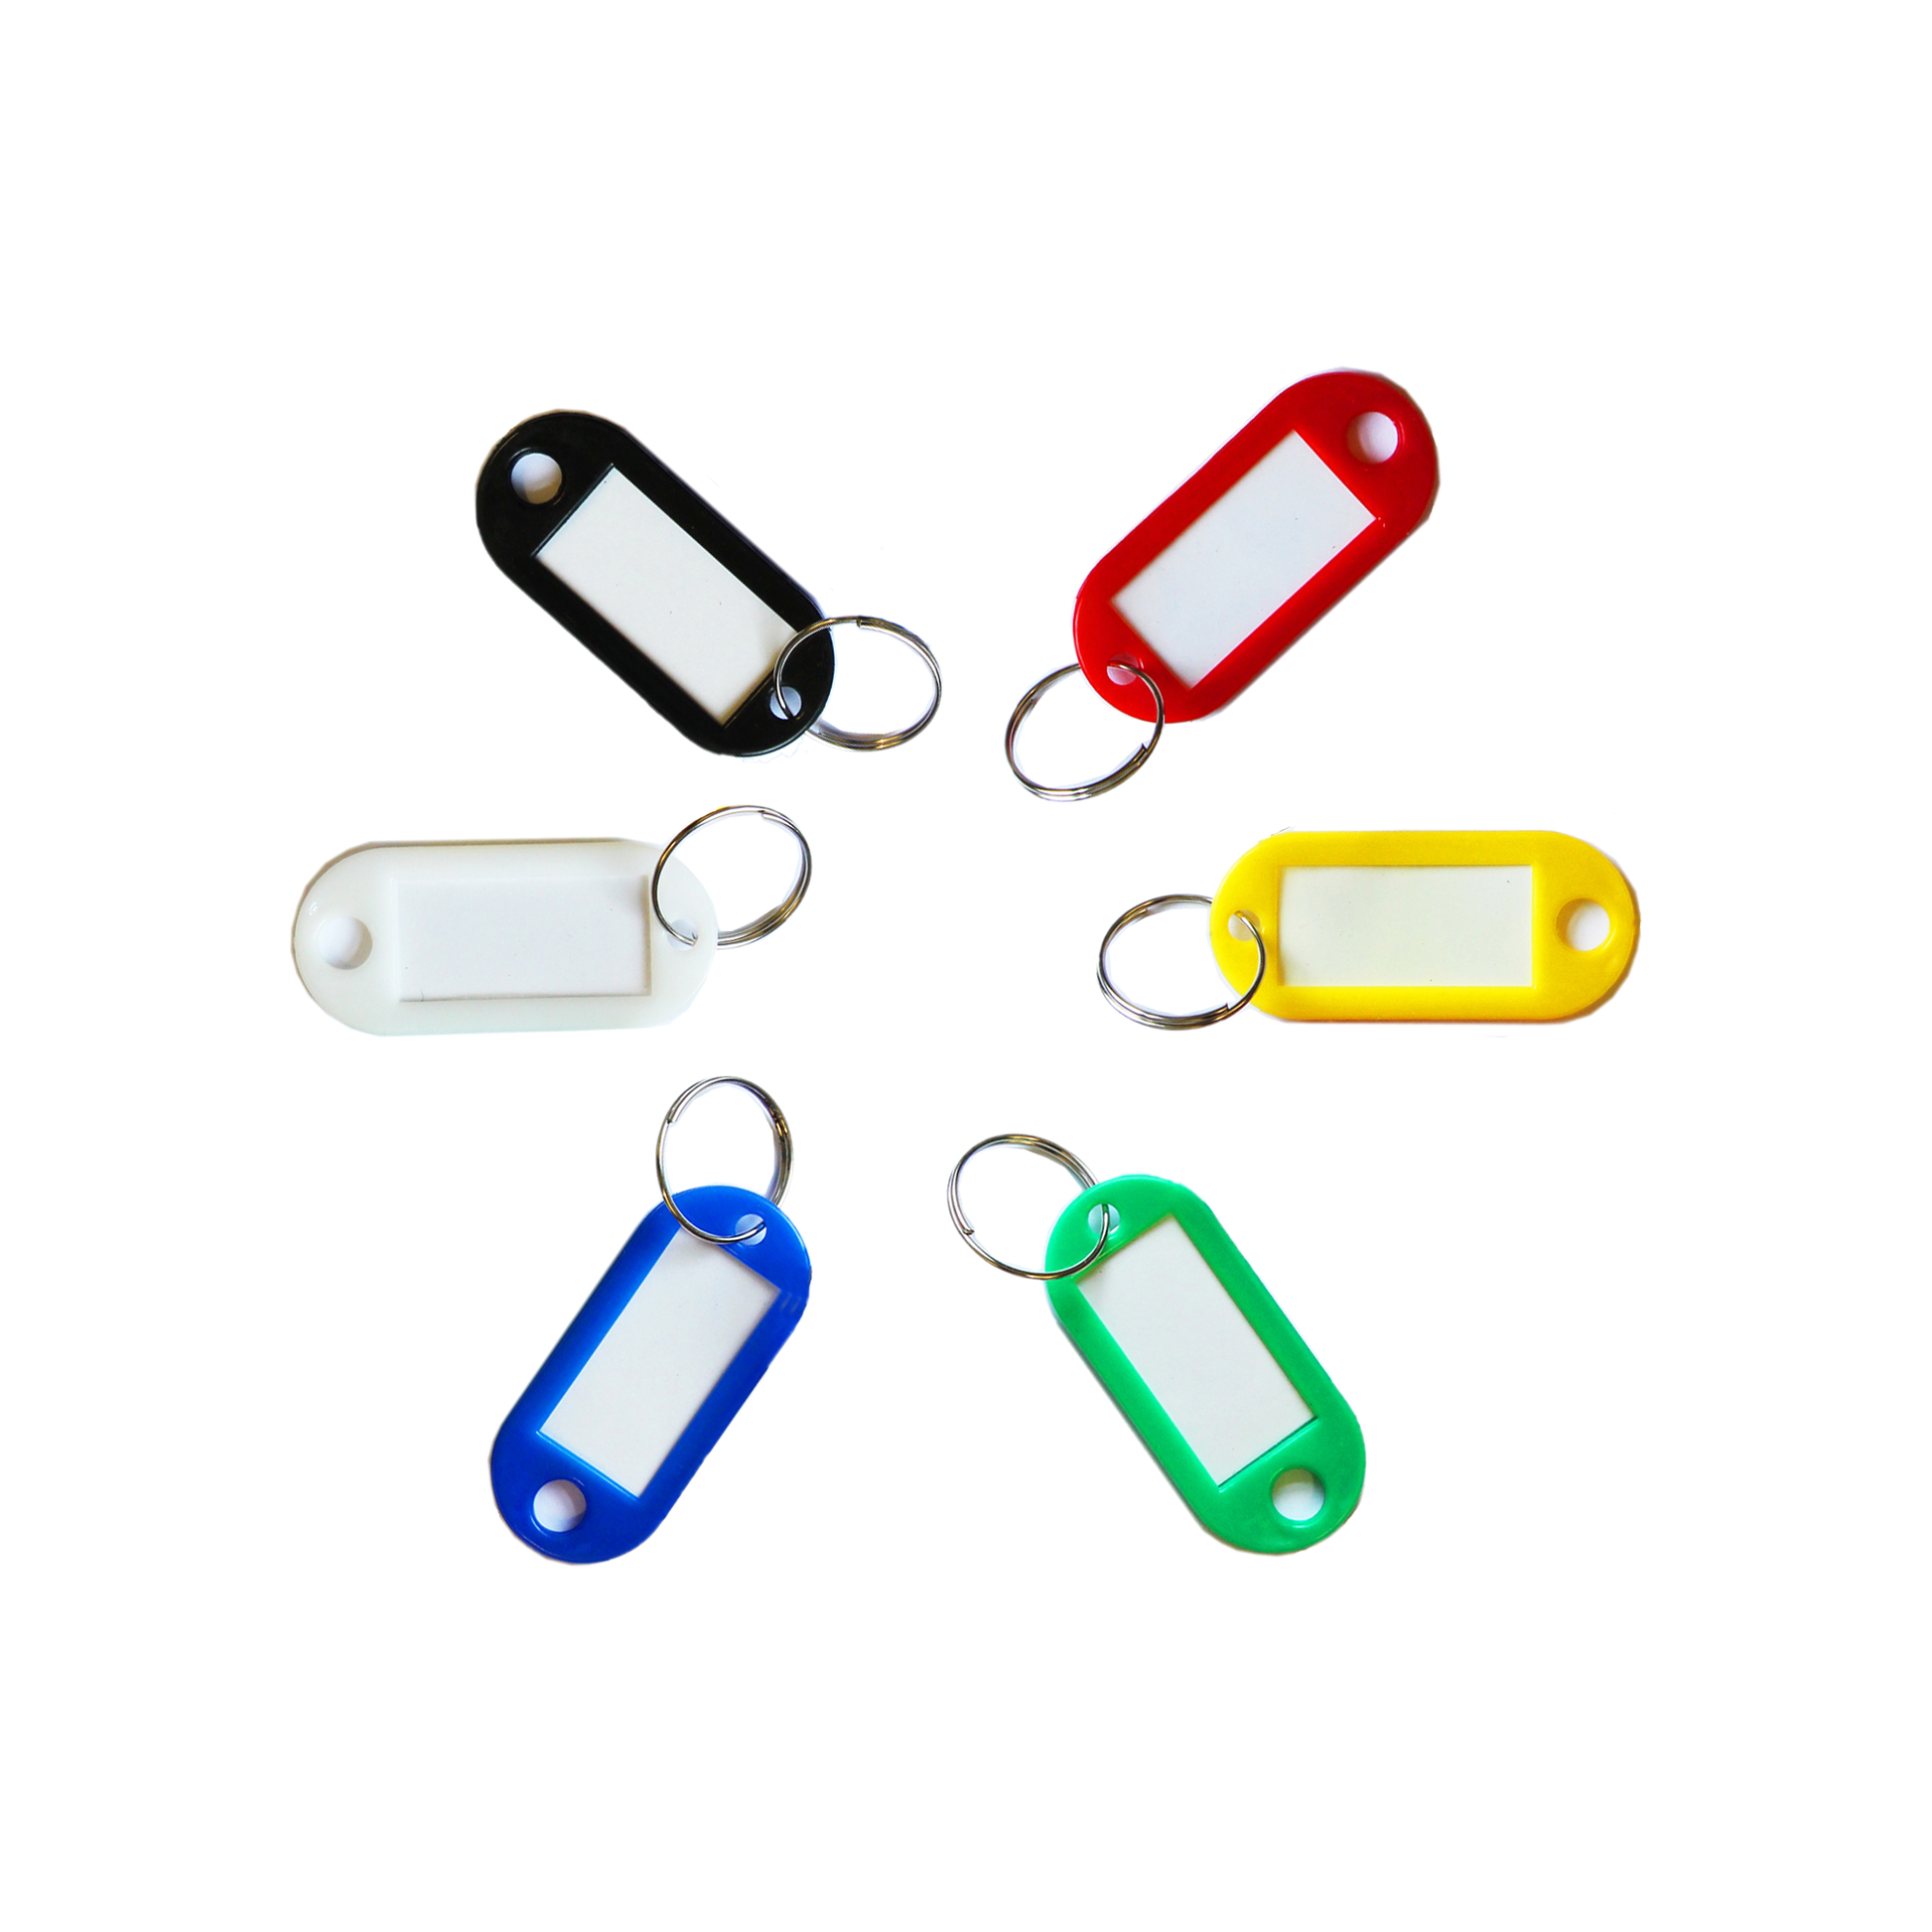 An assortment of colourful sliding key tags with metal rings, displayed against a white background. The tags are in red, yellow, green, blue, white, and black each with a paper insert for labelling.